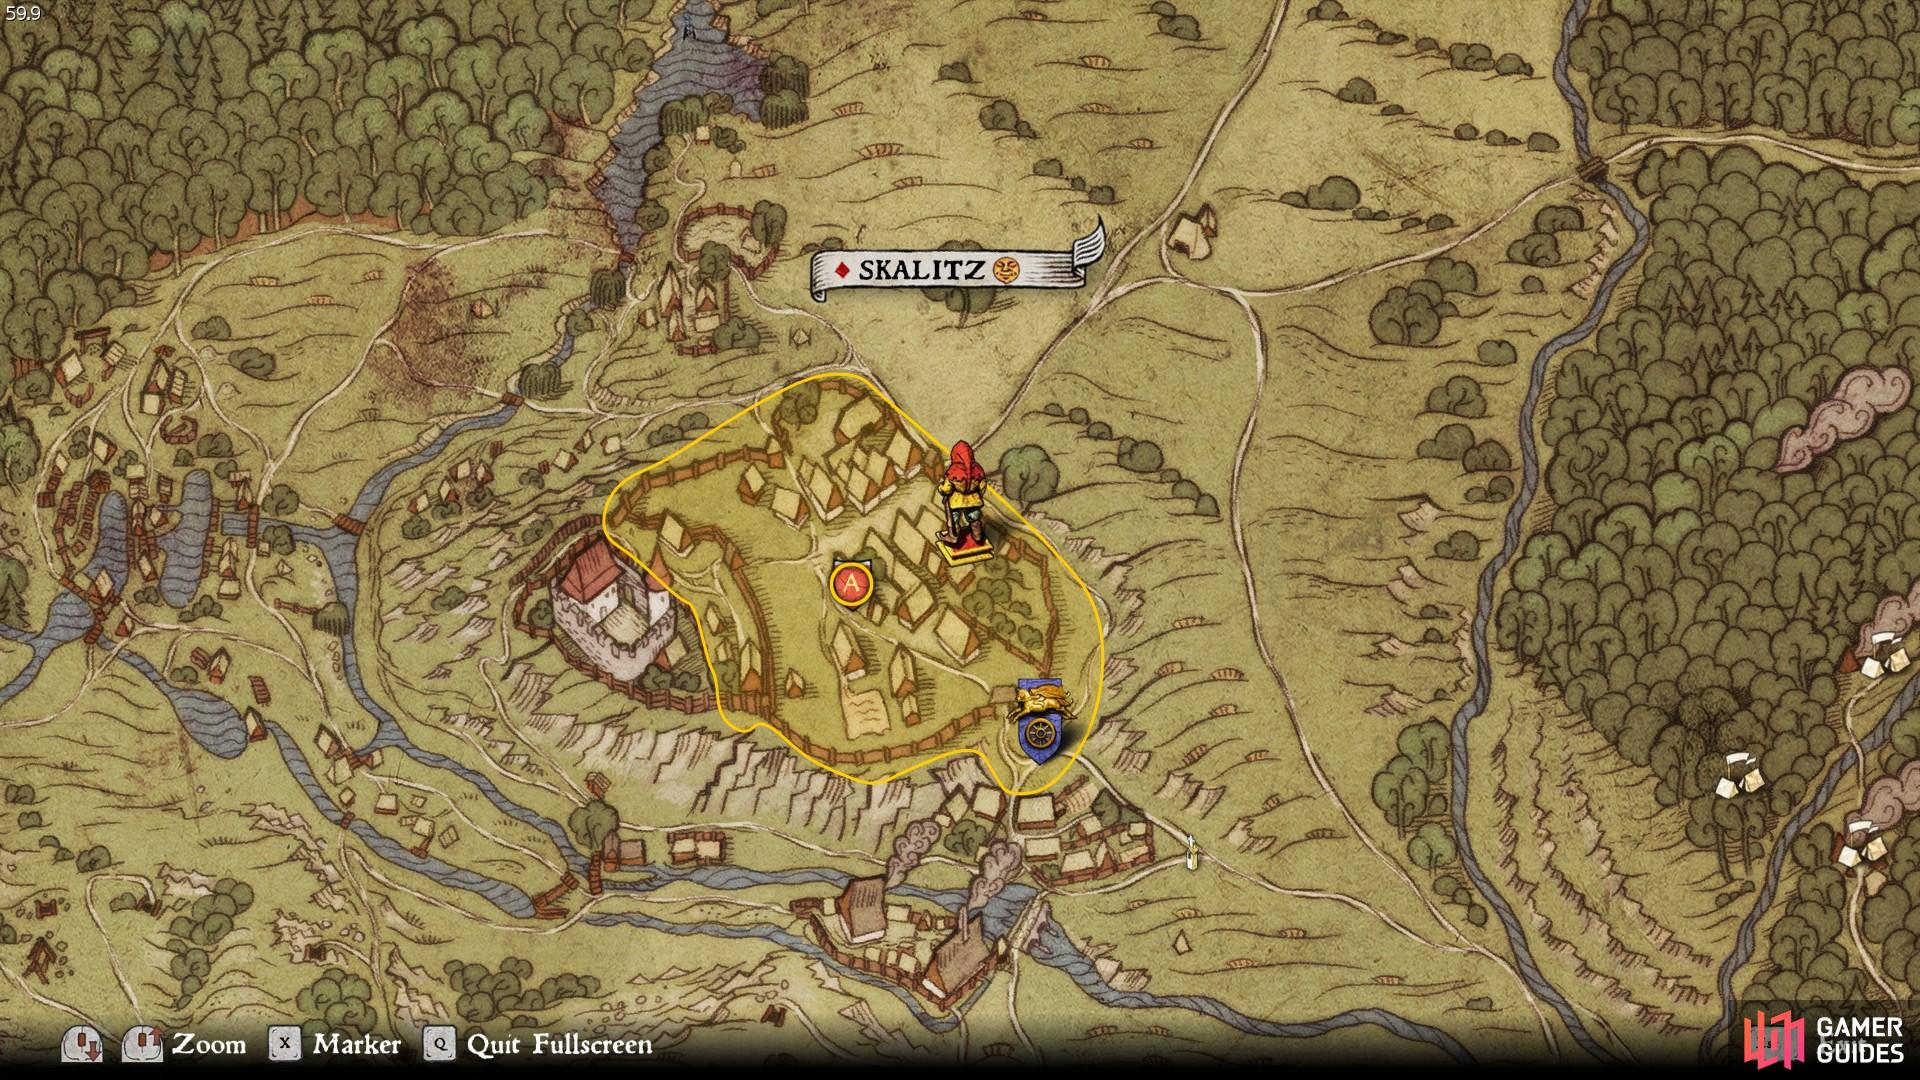 The location of the dove-cote in Skalitz under which the treasure can be found.